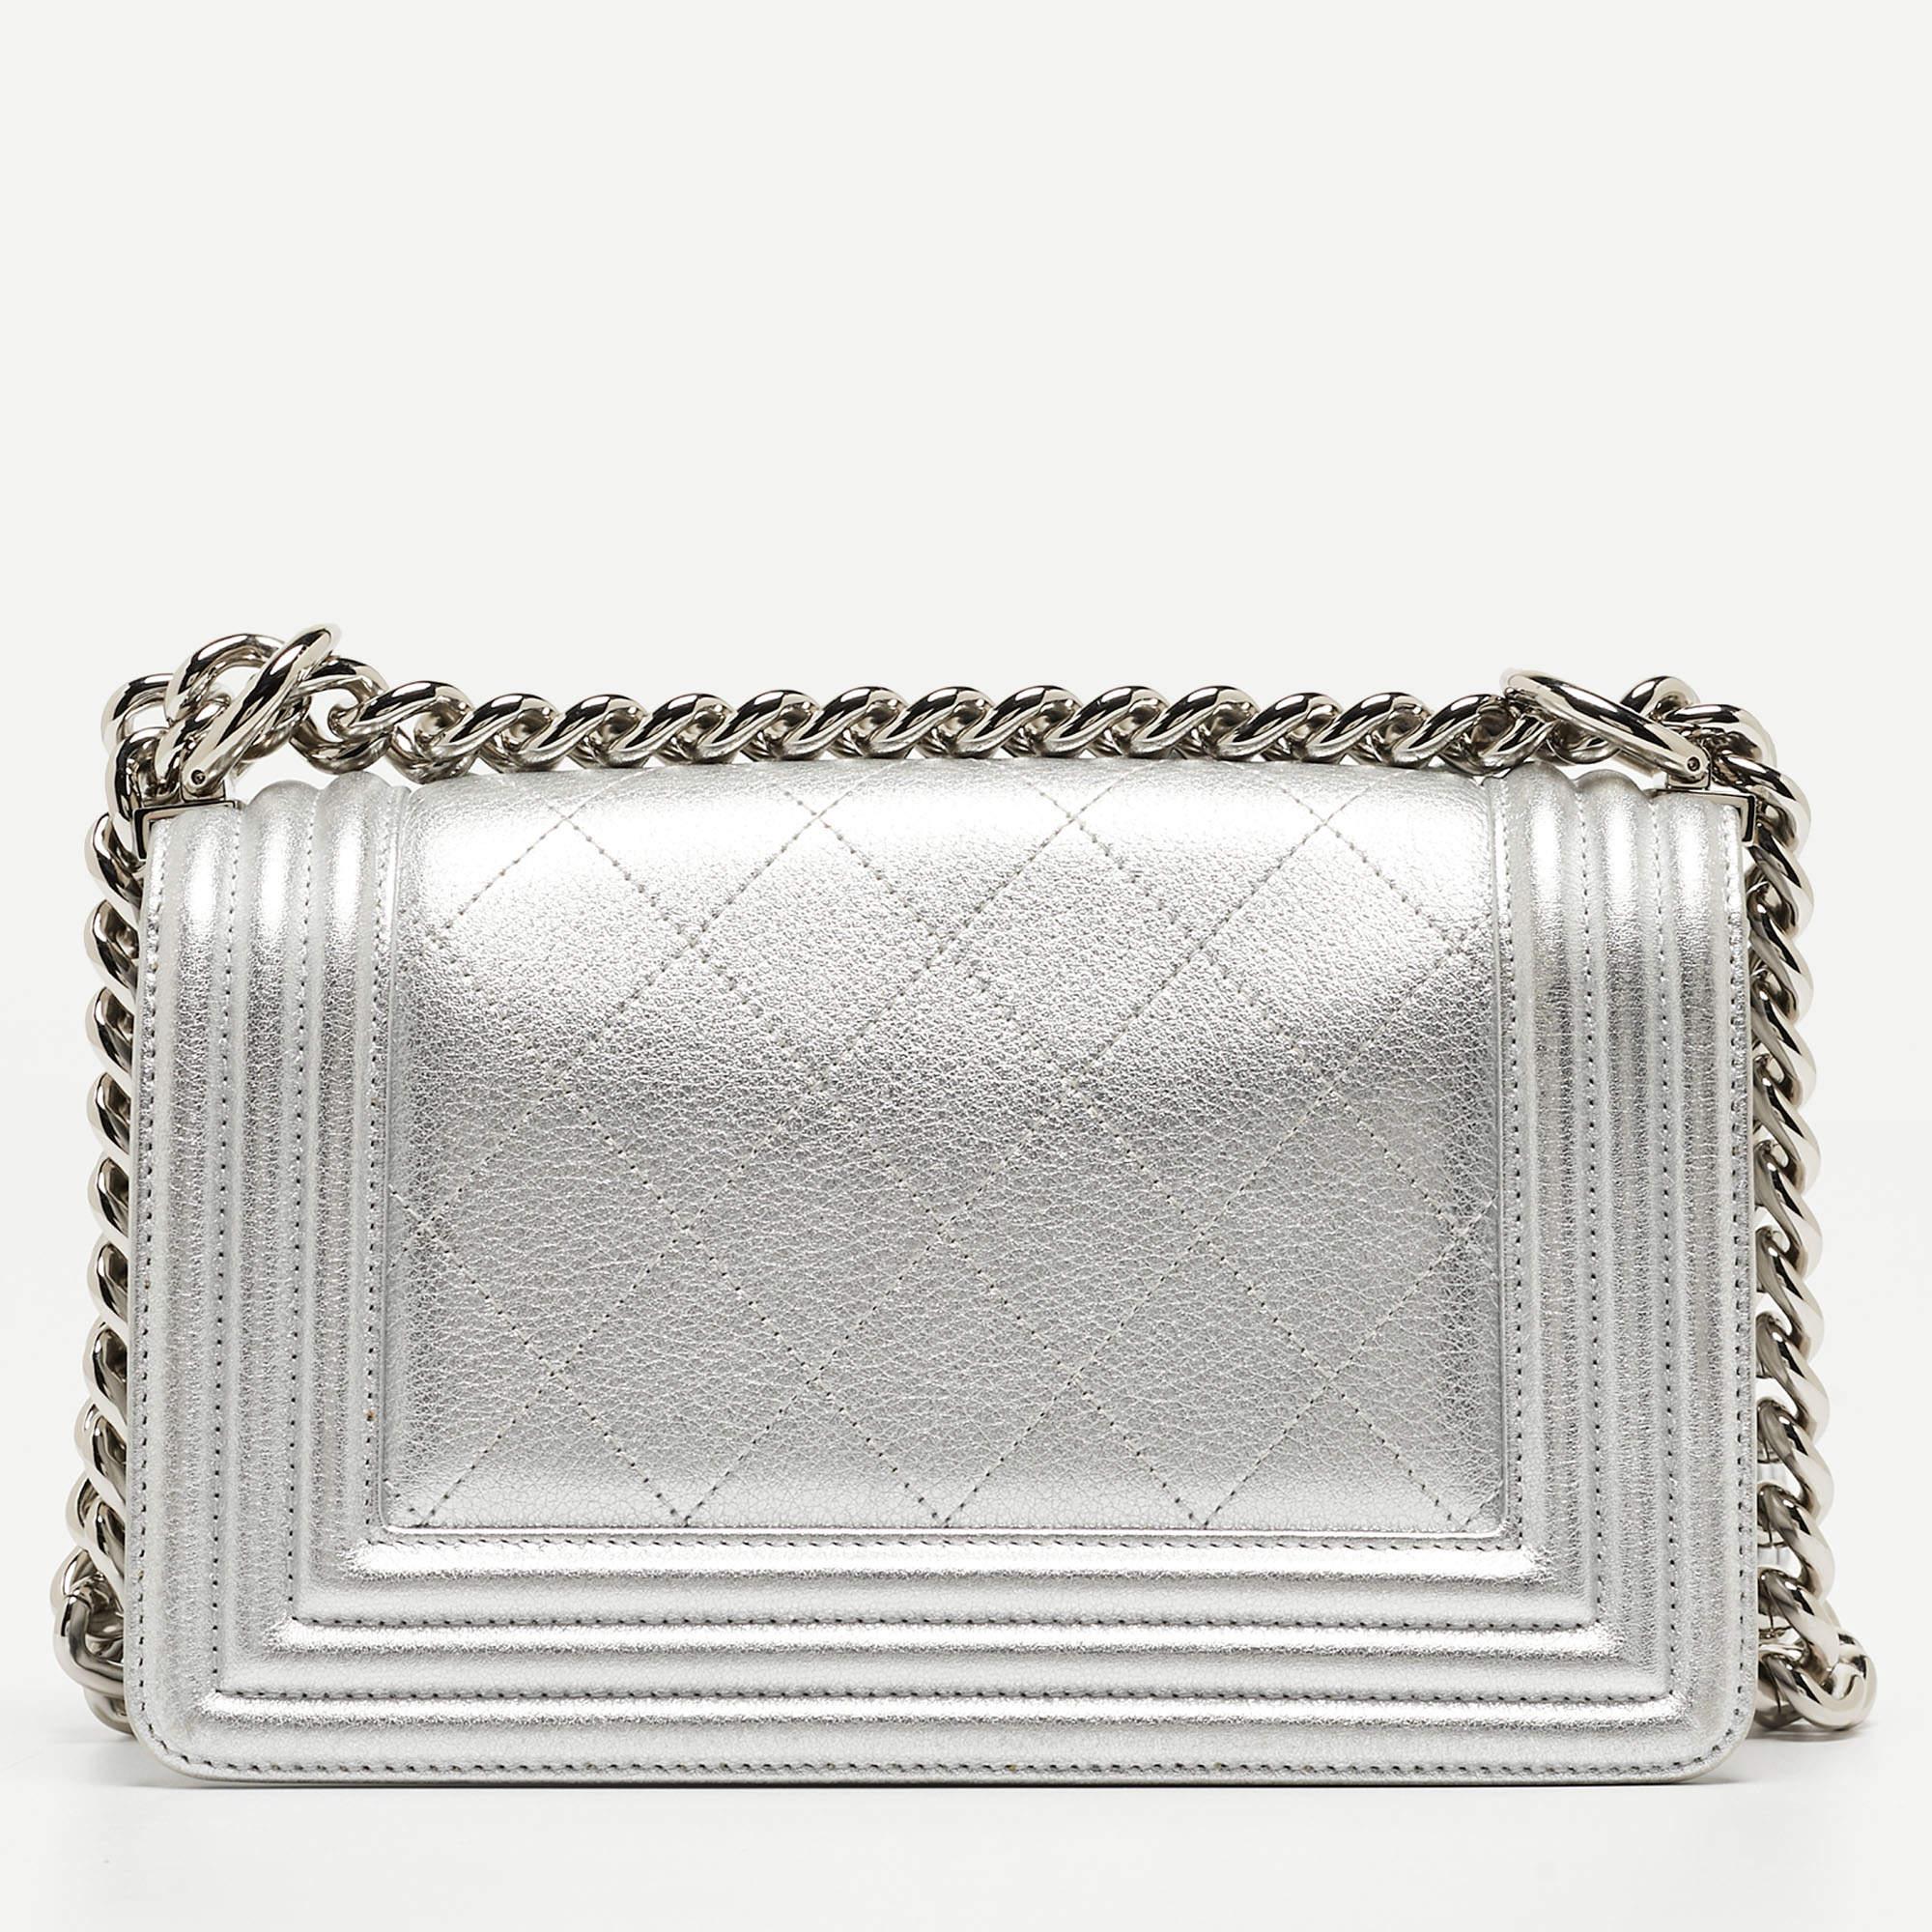 Chanel Silver Quilted Leather Small Camellia Applique Boy Flap Bag 2